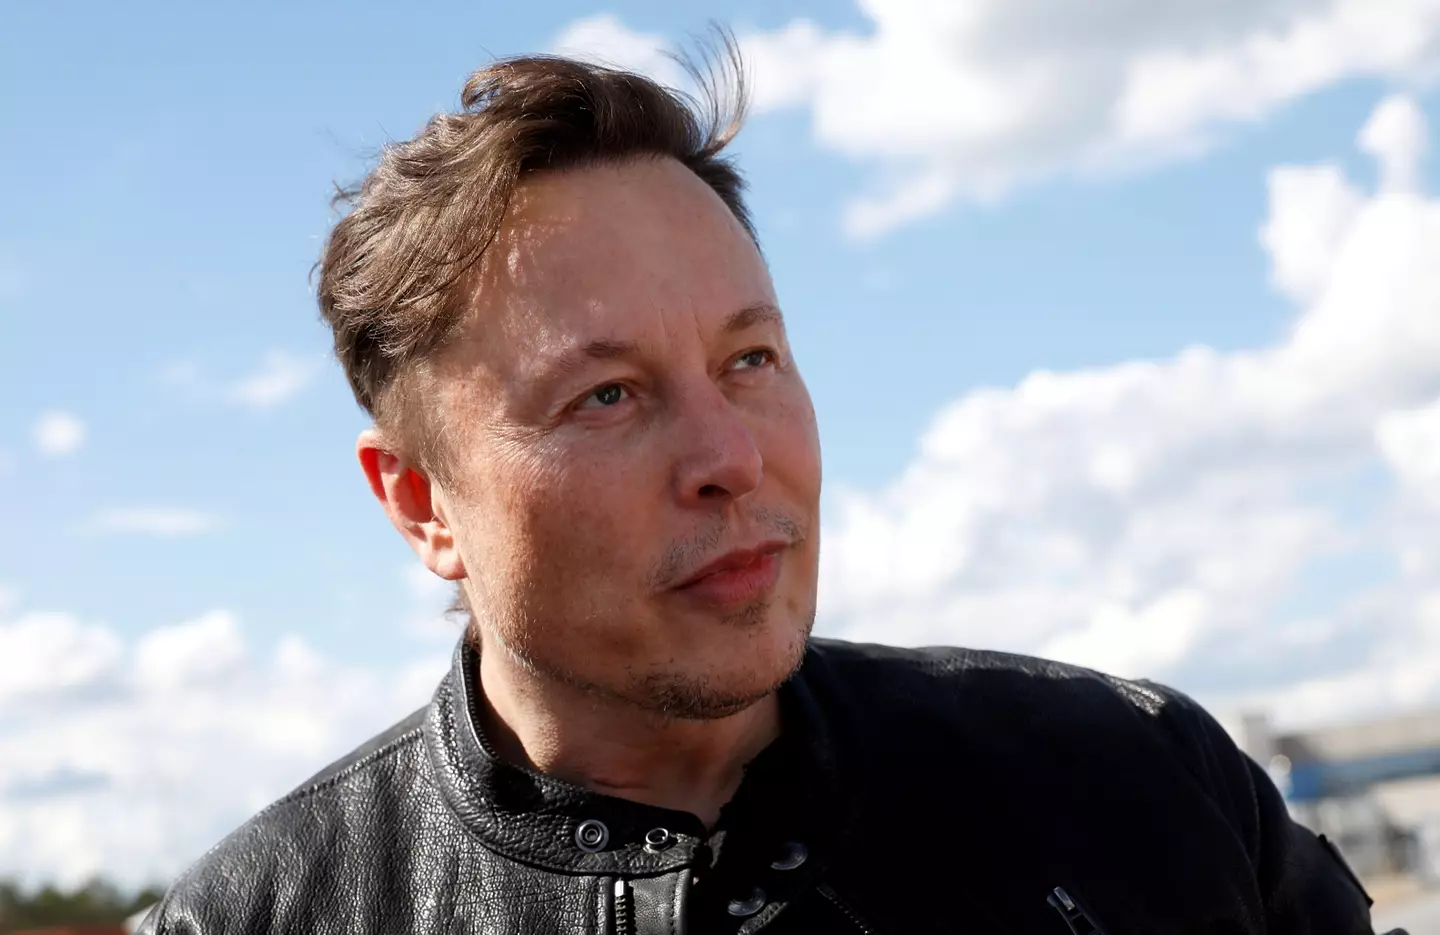 Musk has struck a deal to buy Twitter.